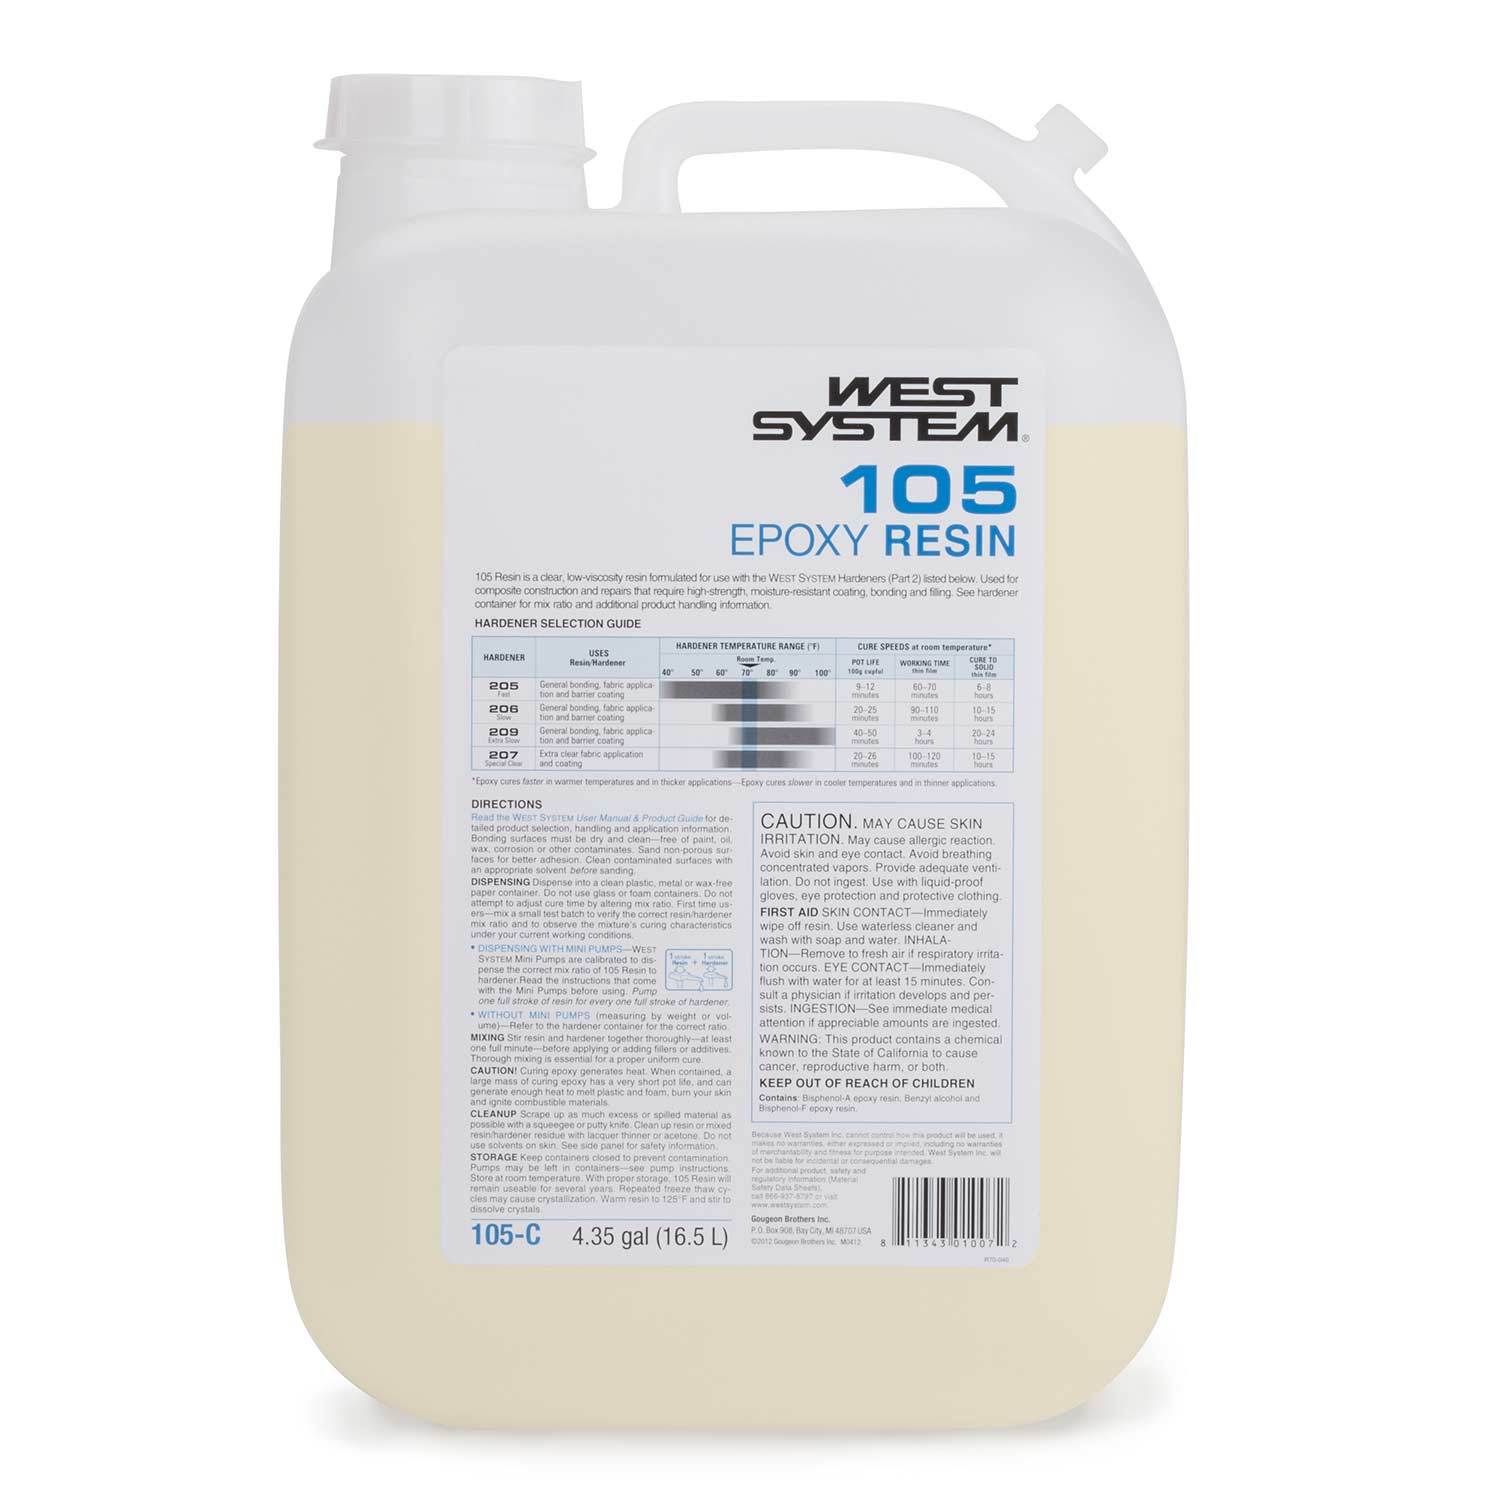  The epoxy Resin Store - Boat Coating, Repairs, Construction, UV  Stable, Non Yellowing, High Performance Coating, 2 Part epoxy kit, Table  Top epoxy kit : Sports & Outdoors